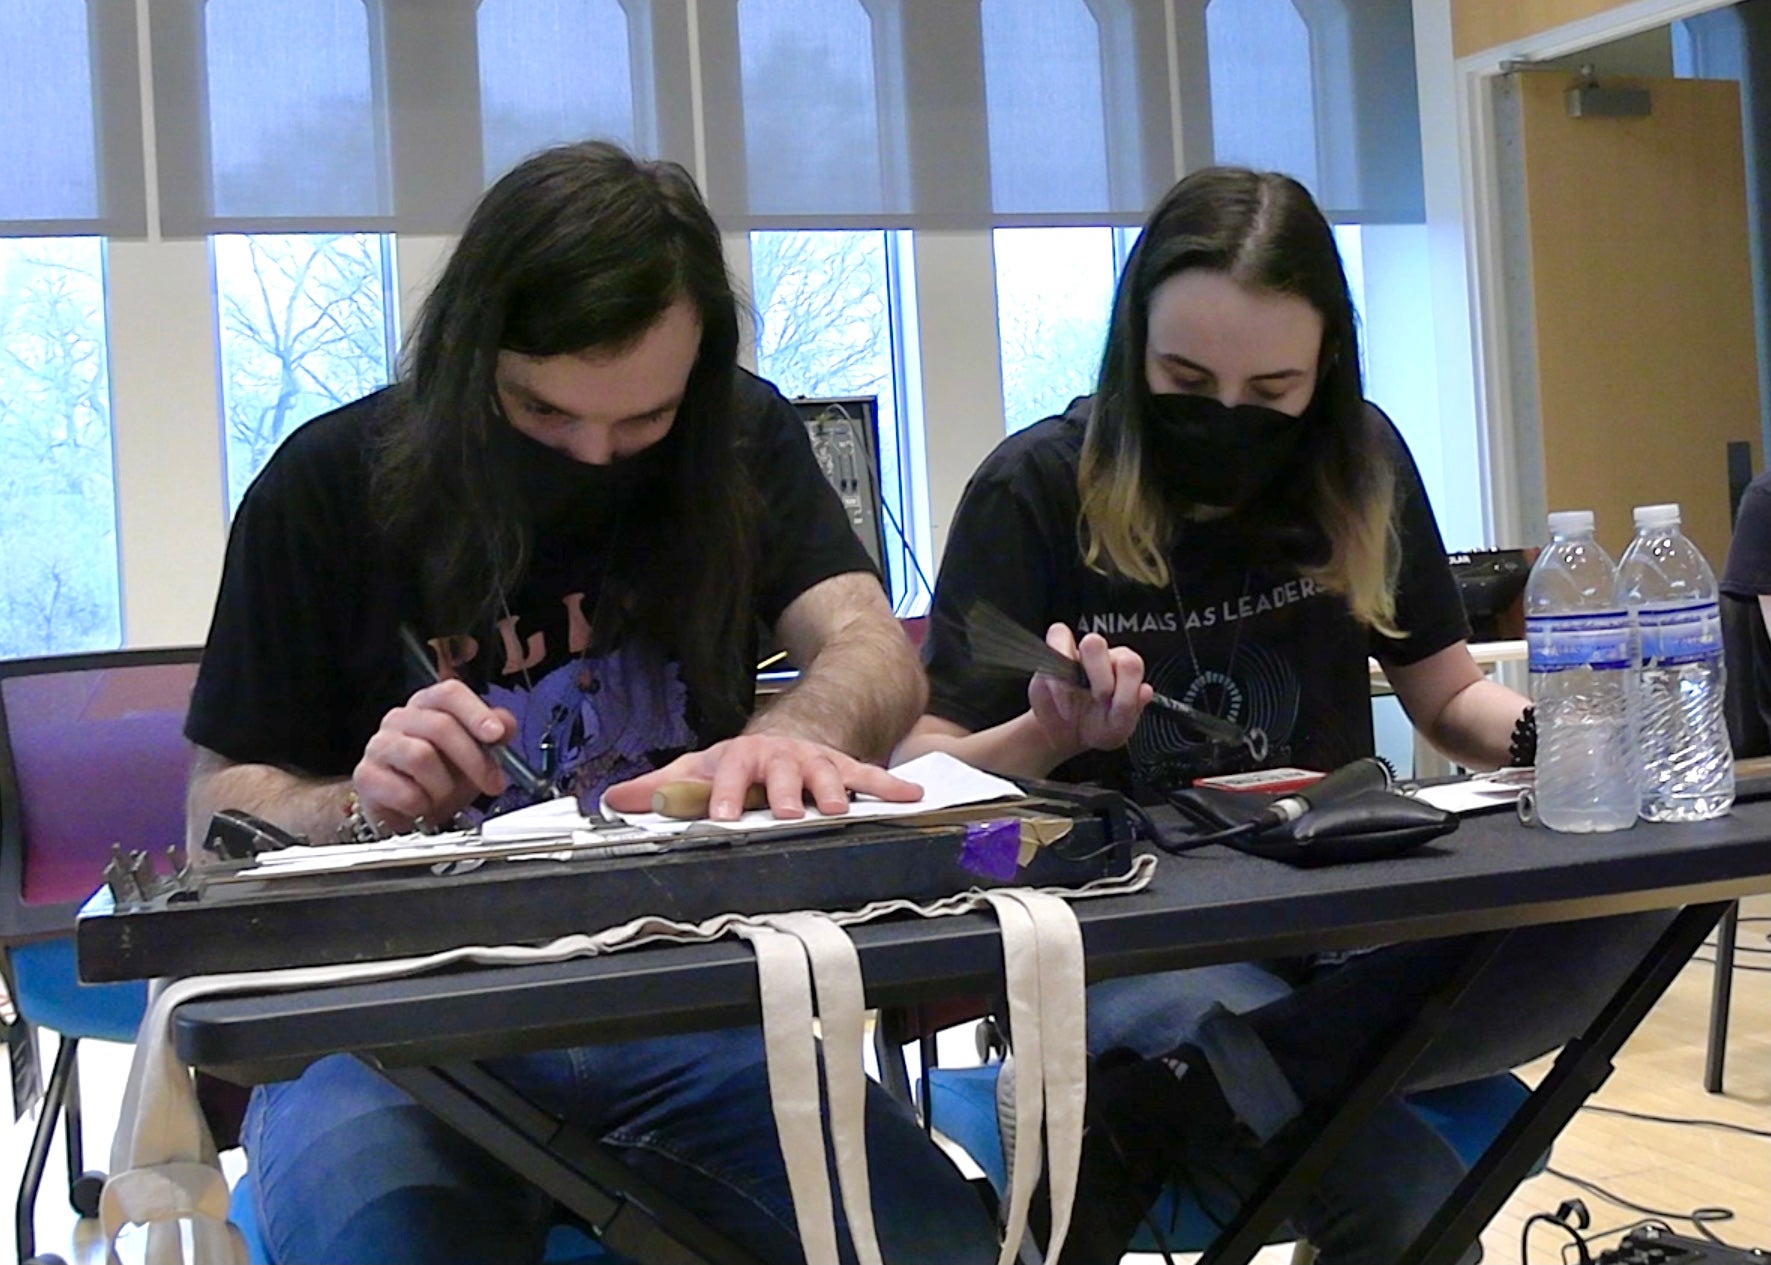 Two musicians improvosing on an auto-harp and found objects.